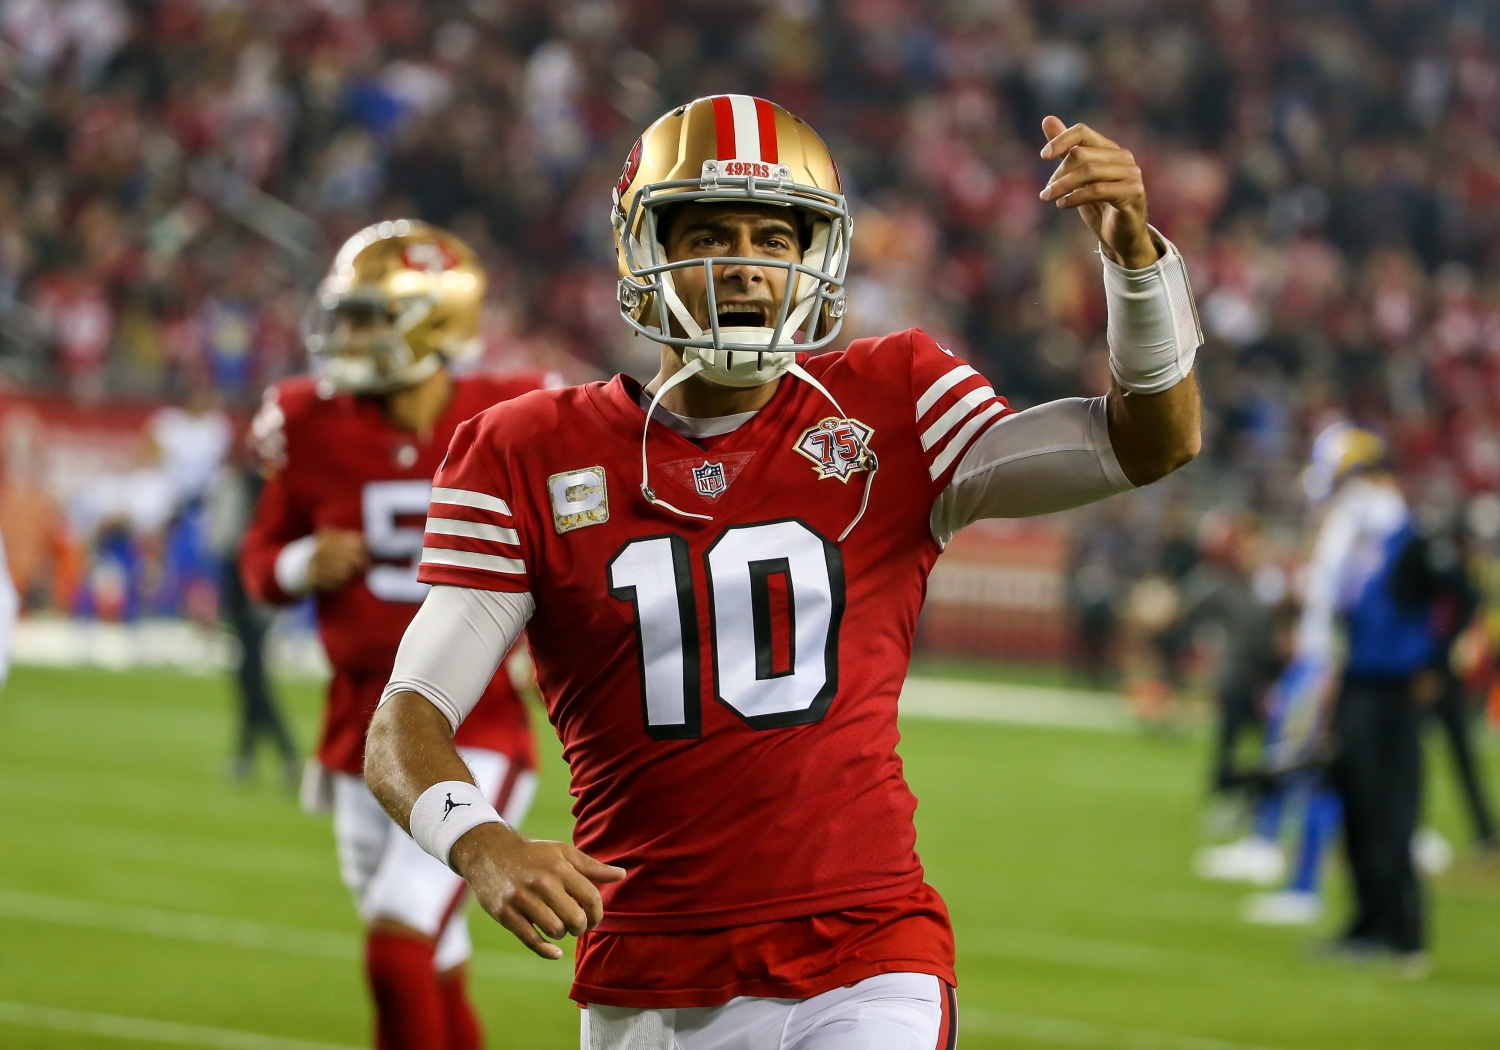 San Francisco 49ers QB Jimmy Garoppolo fires up the crowd before a game against the Los Angeles Rams.